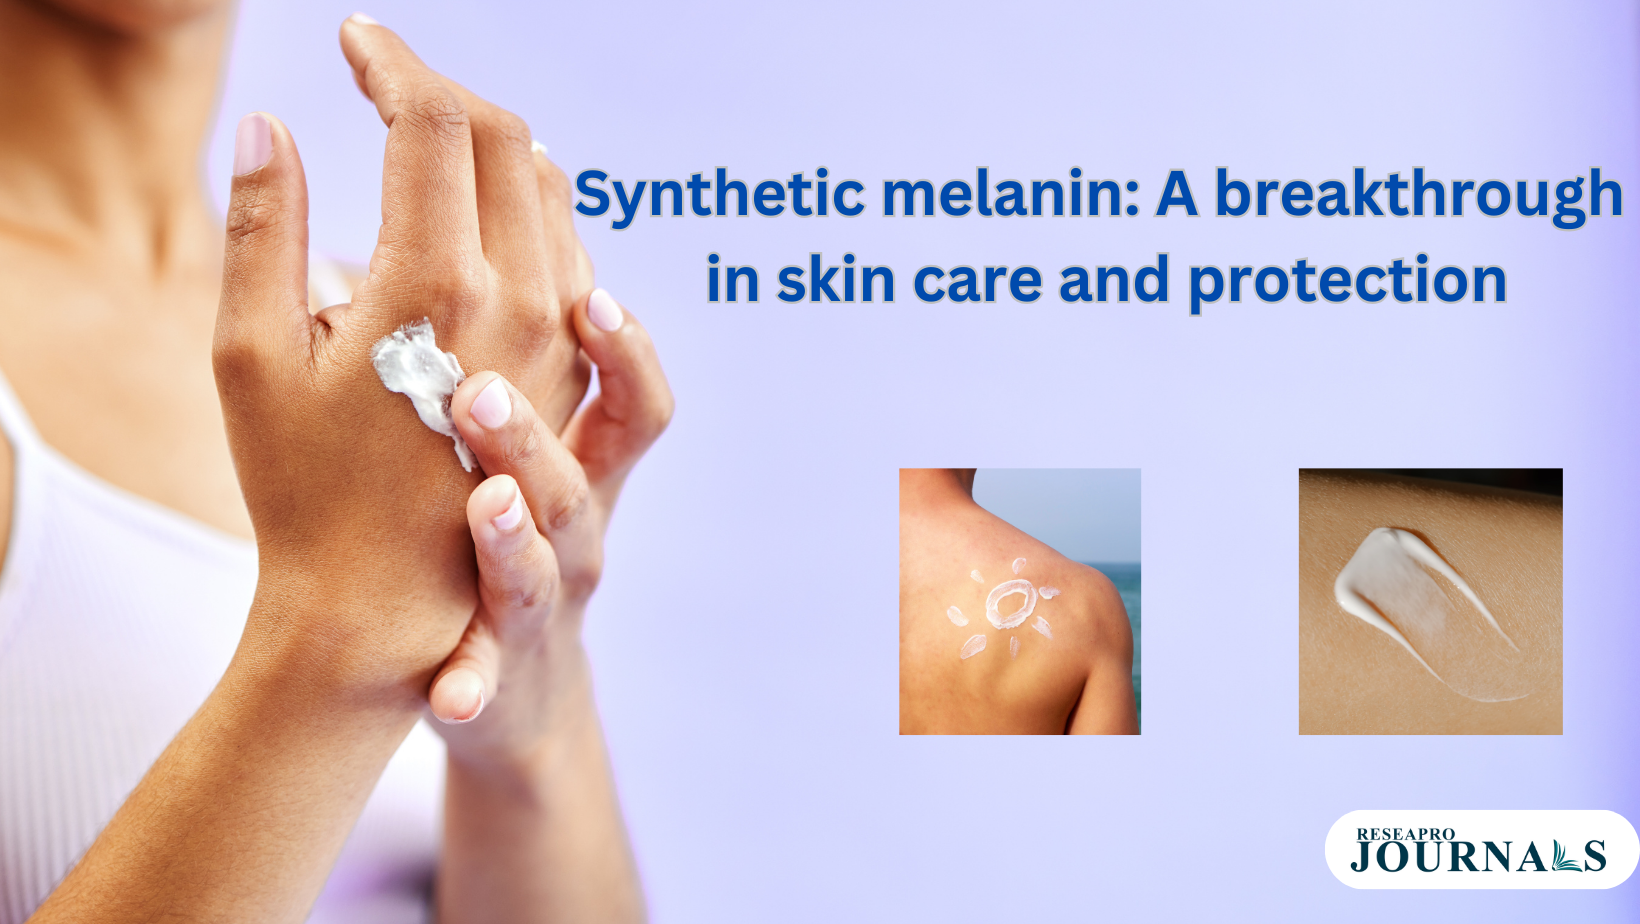 Synthetic melanin: The ultimate skin care solution for sunburns and wounds